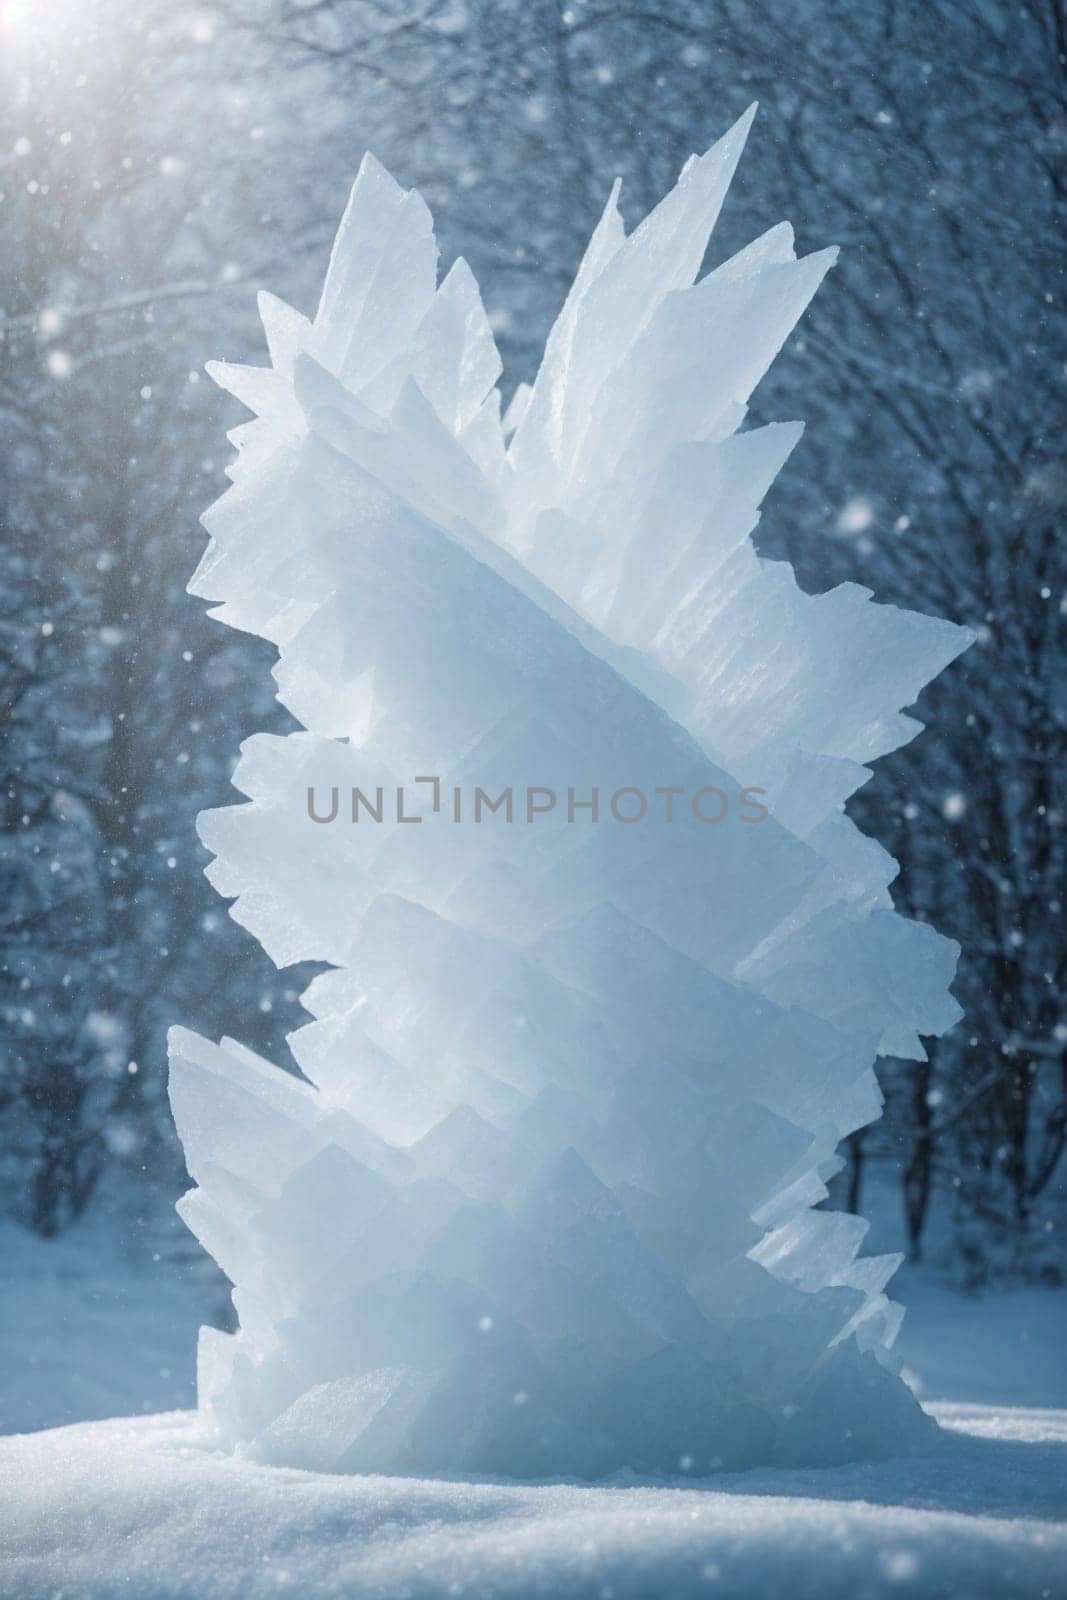 A stunning ice sculpture, towering amidst the snowy trees, creates a breathtaking scene in the serene forest.